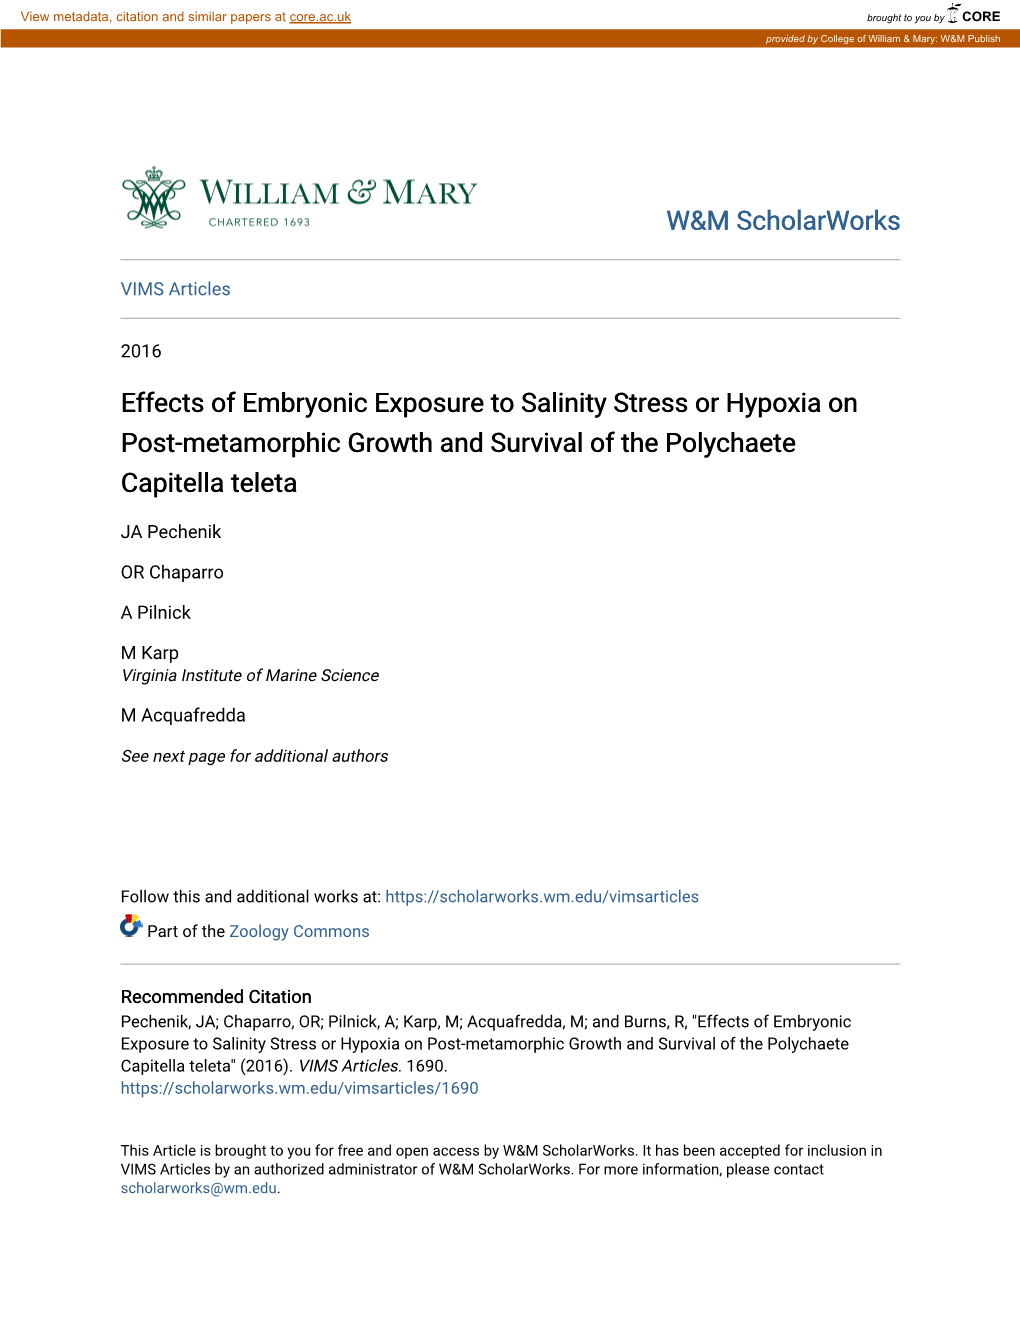 Effects of Embryonic Exposure to Salinity Stress Or Hypoxia on Post-Metamorphic Growth and Survival of the Polychaete Capitella Teleta